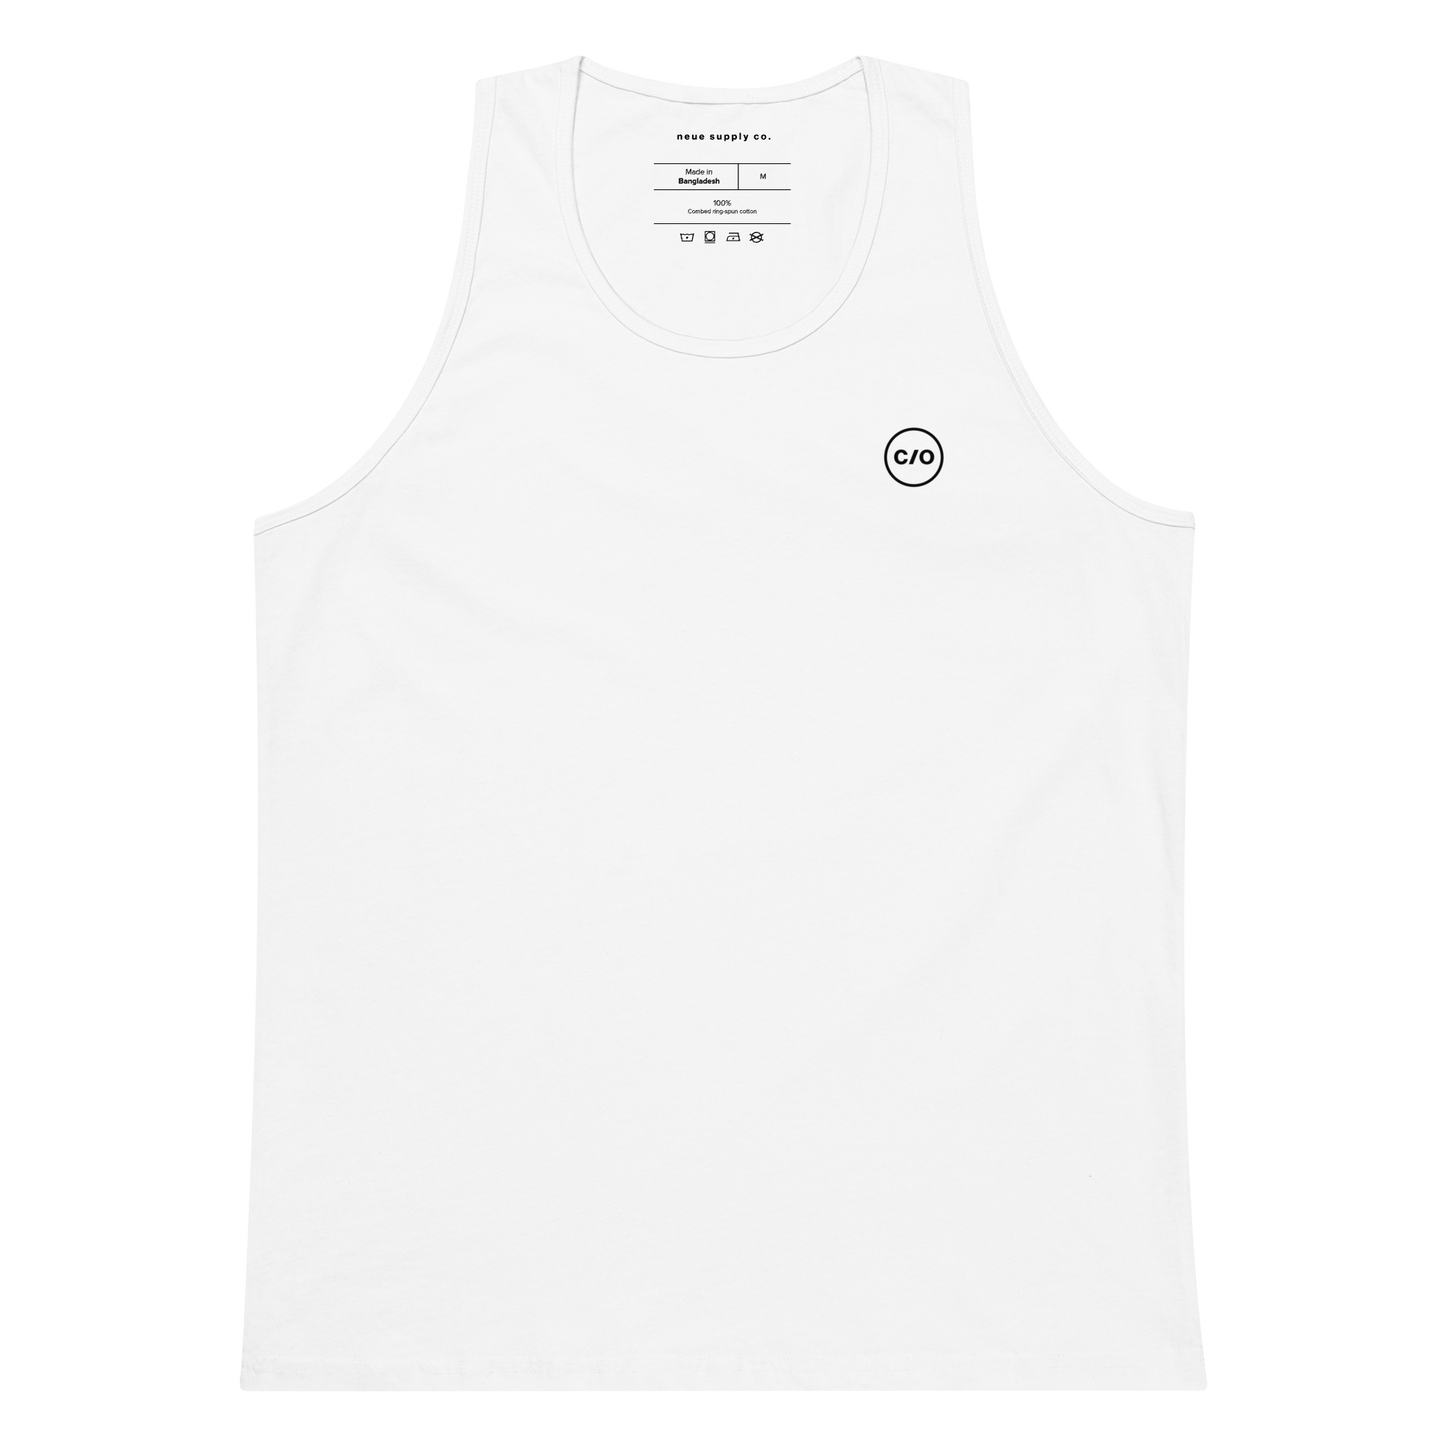 Neue Supply Co. Essential Workout Tank Top for Men in White flat view